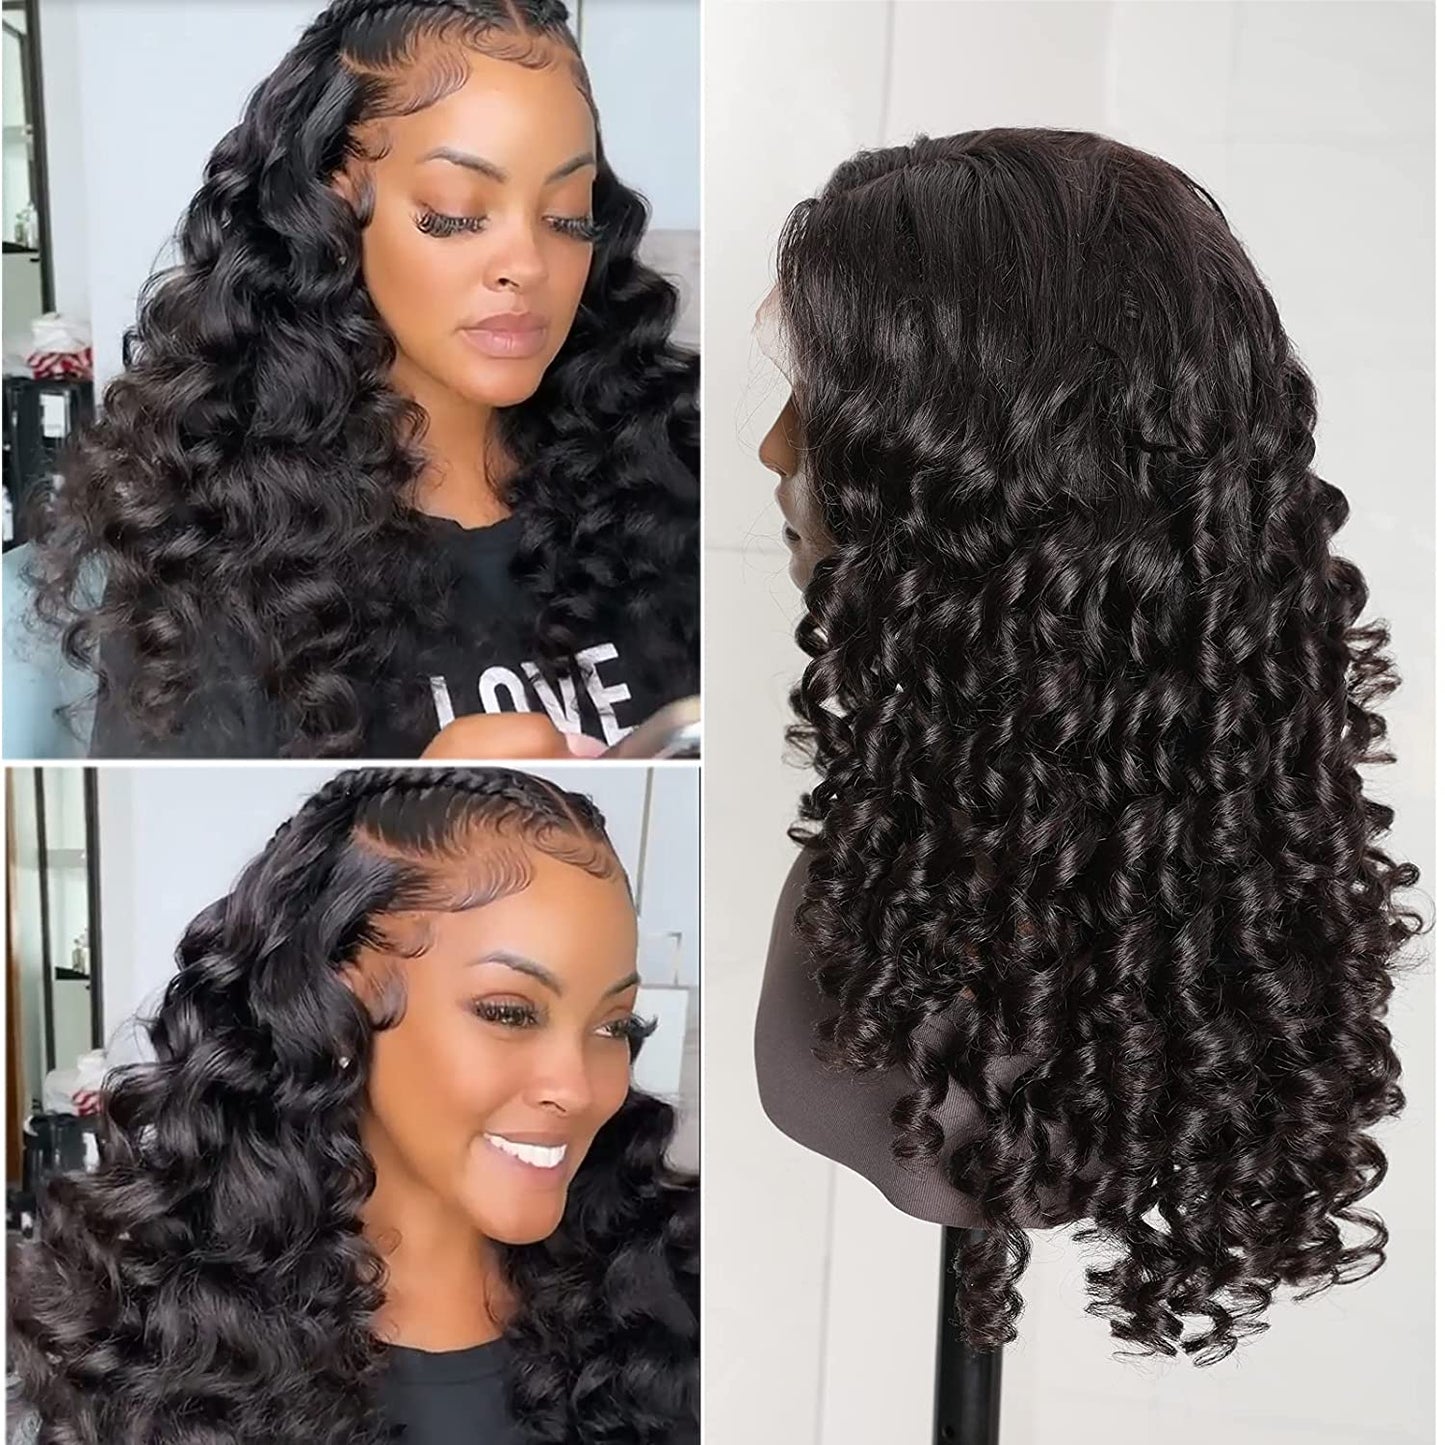 Spiral Curl 13X4 Lace Front Wig Human Hair for Black Women,10a Brazilian Virgin Hair 18inches